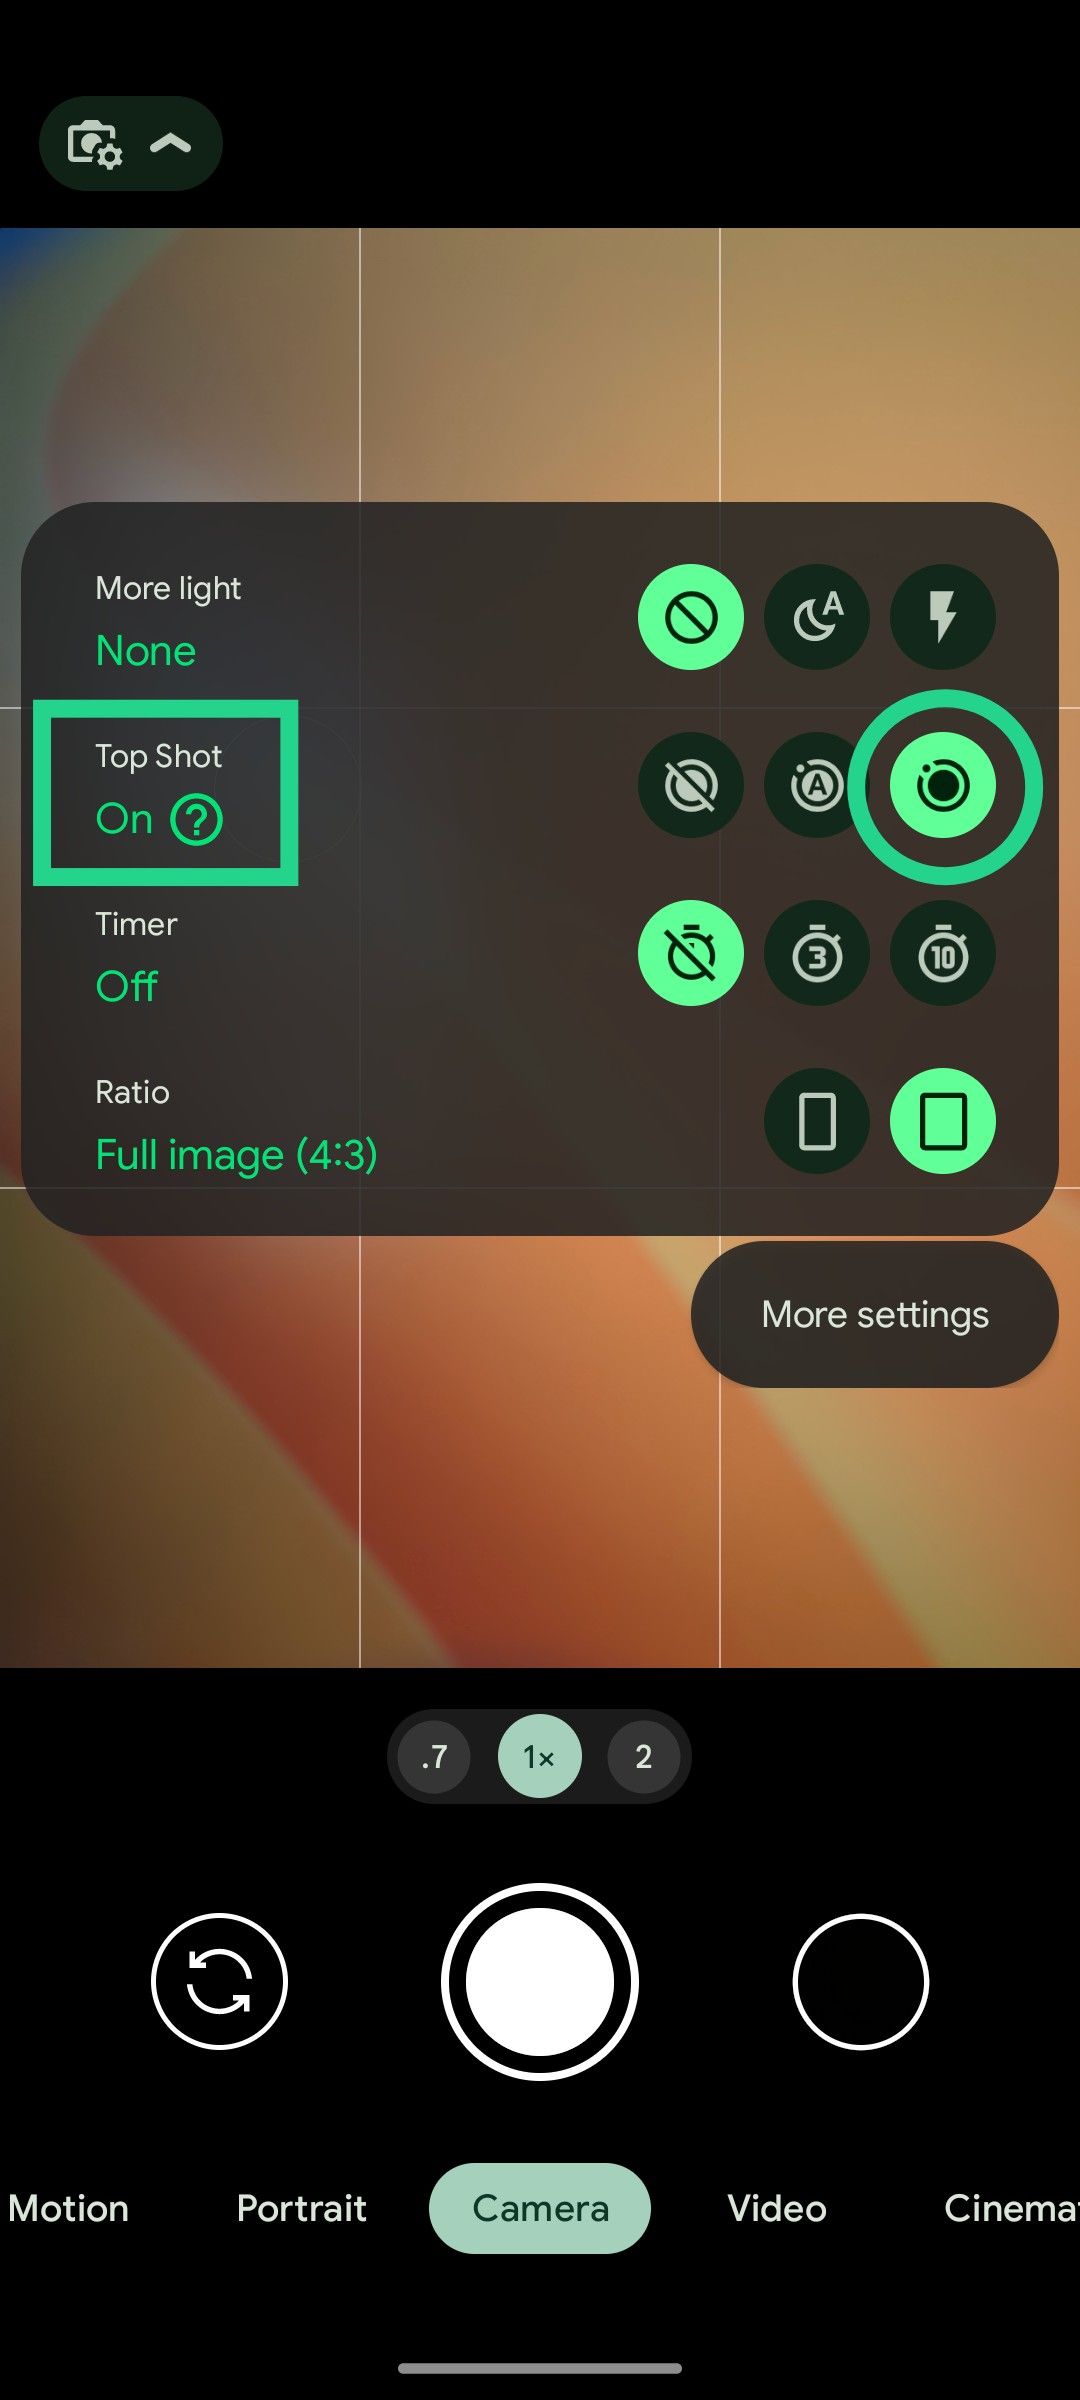 A Pixel phone's camera viewfinder with Top Shot settings highlighted.